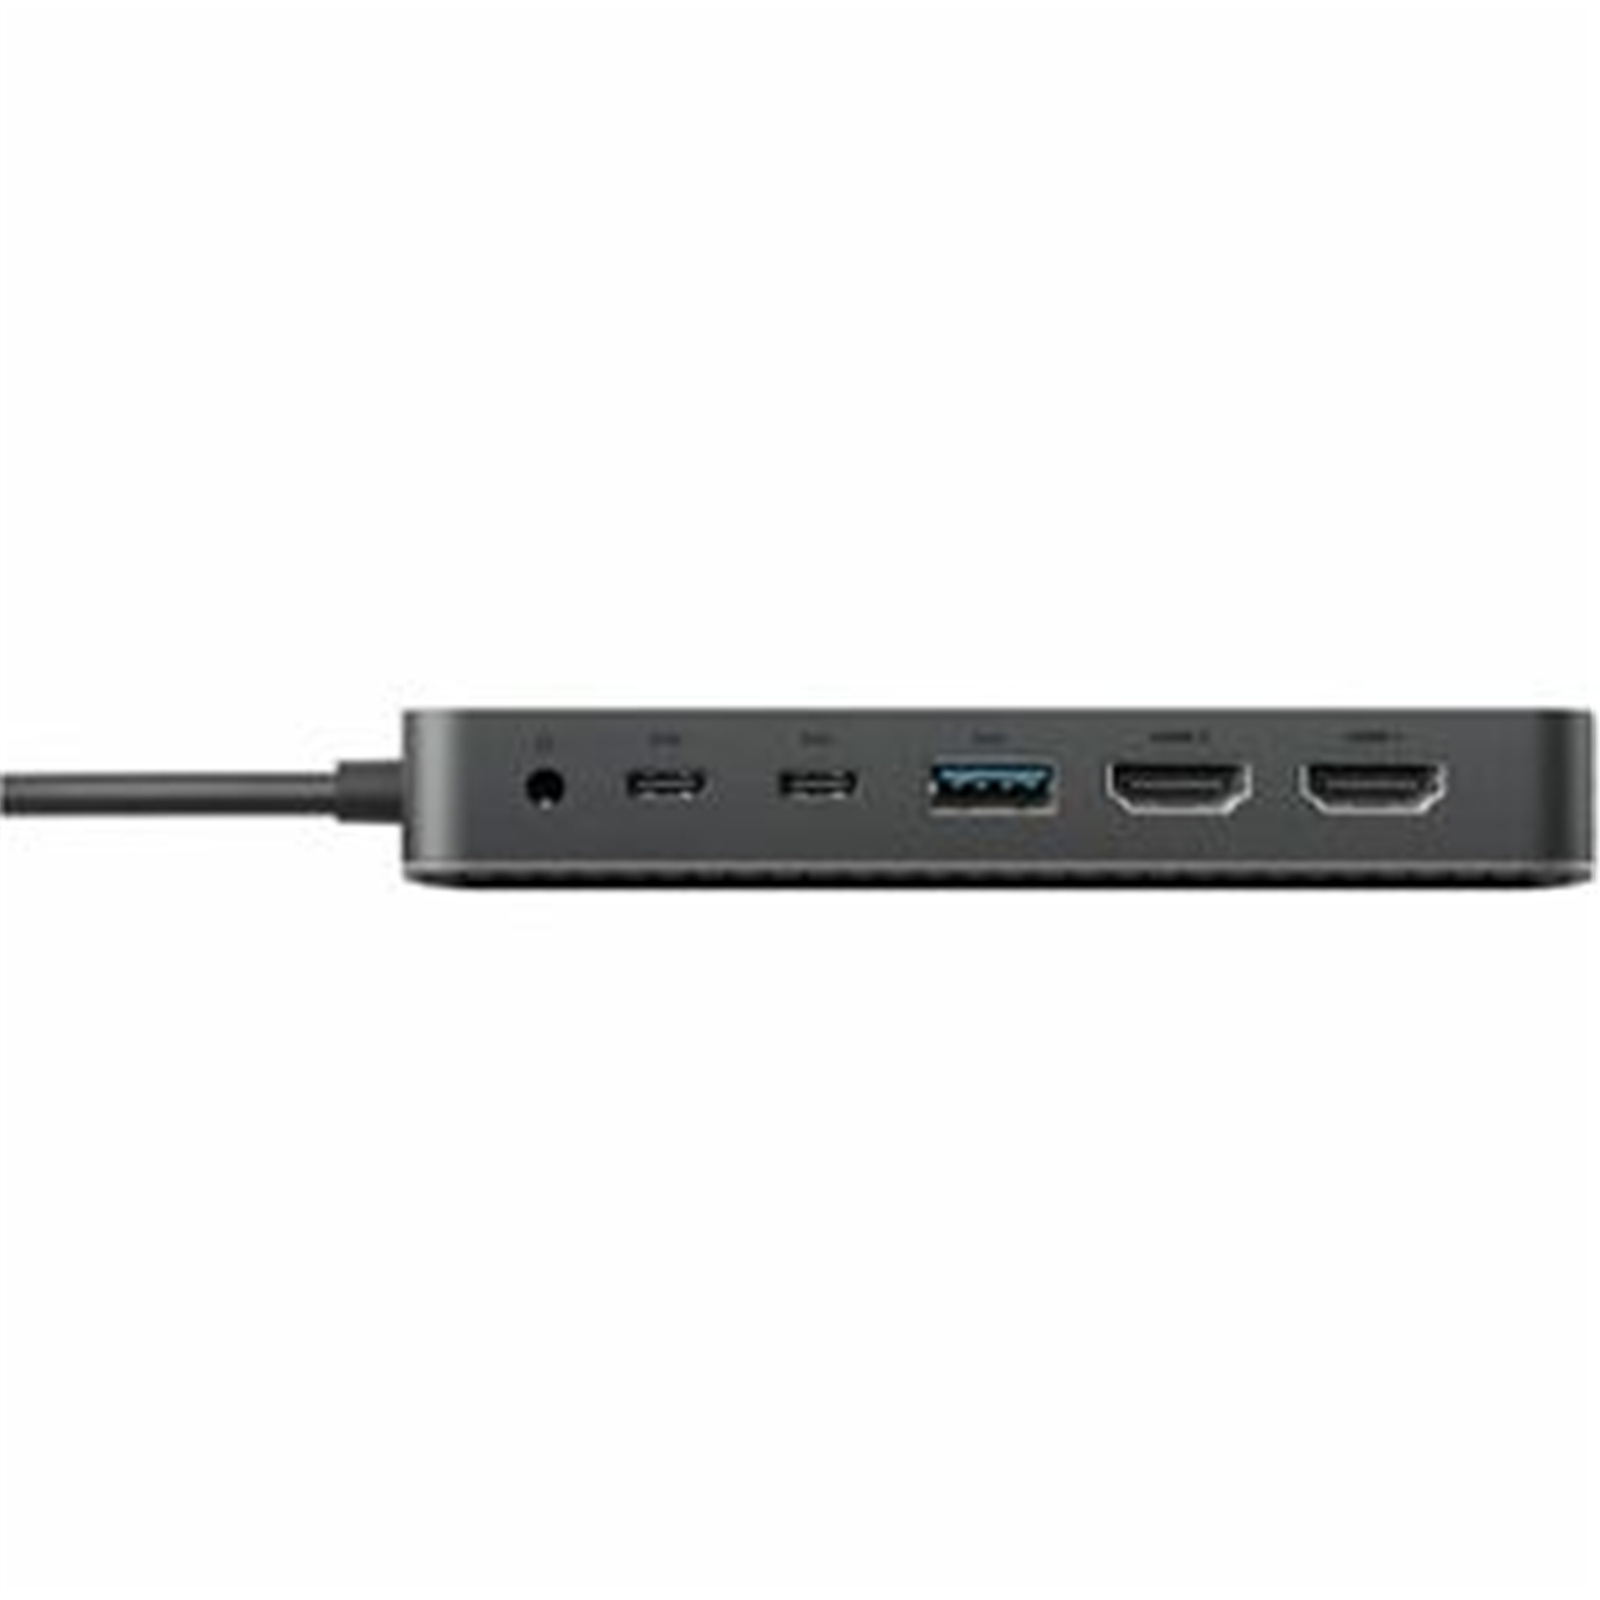 HyperDrive Dual 4K HDMI 10-in-1 USB-C Hub For M1, M2, and M3